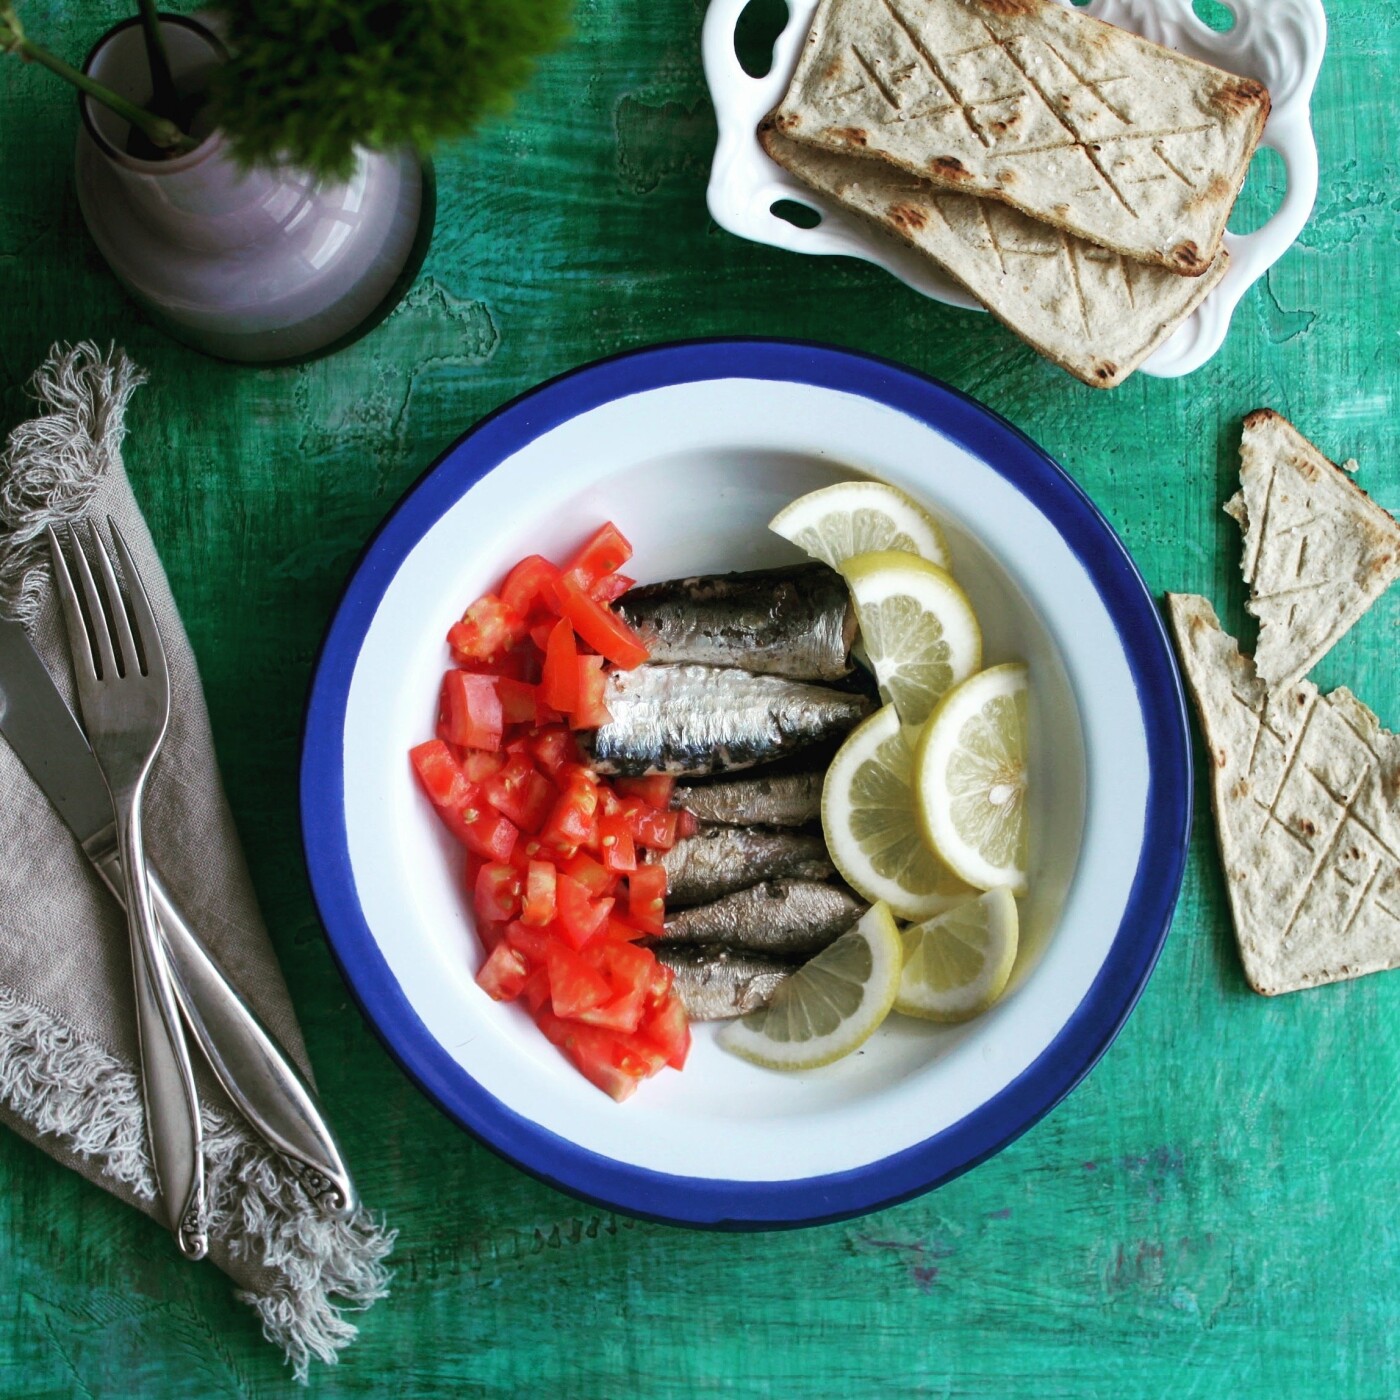 Smoked sprats with fresh tomatoes and a squirt of lemon on corn toasts.